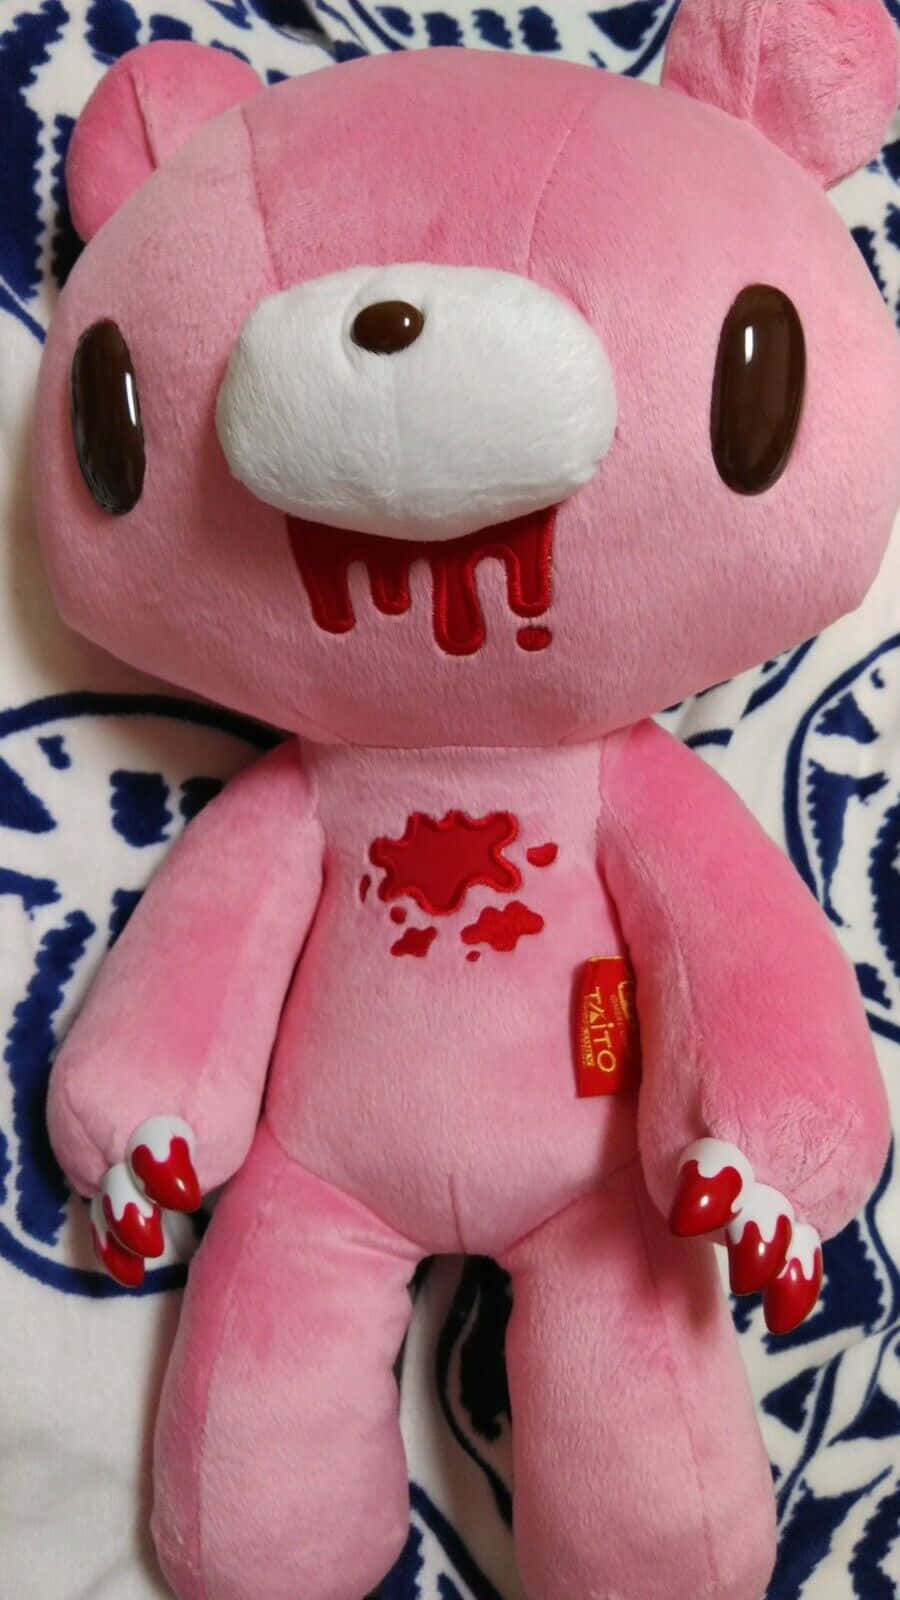 A Pink Stuffed Animal With Blood On It Wallpaper